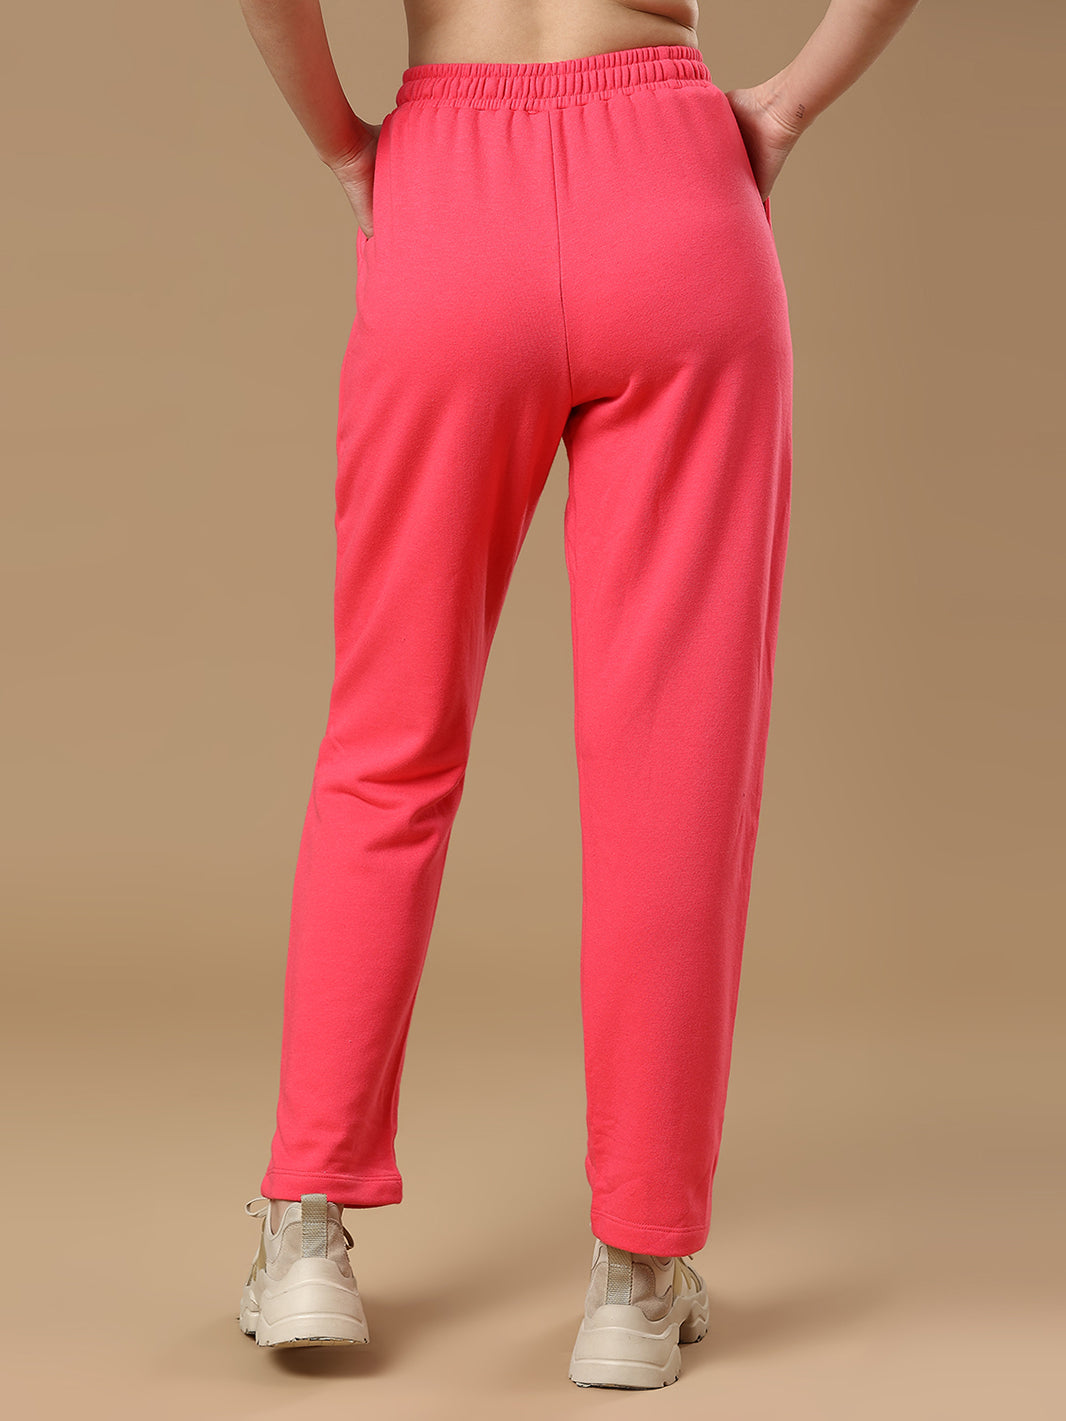 Women Red Color Pant